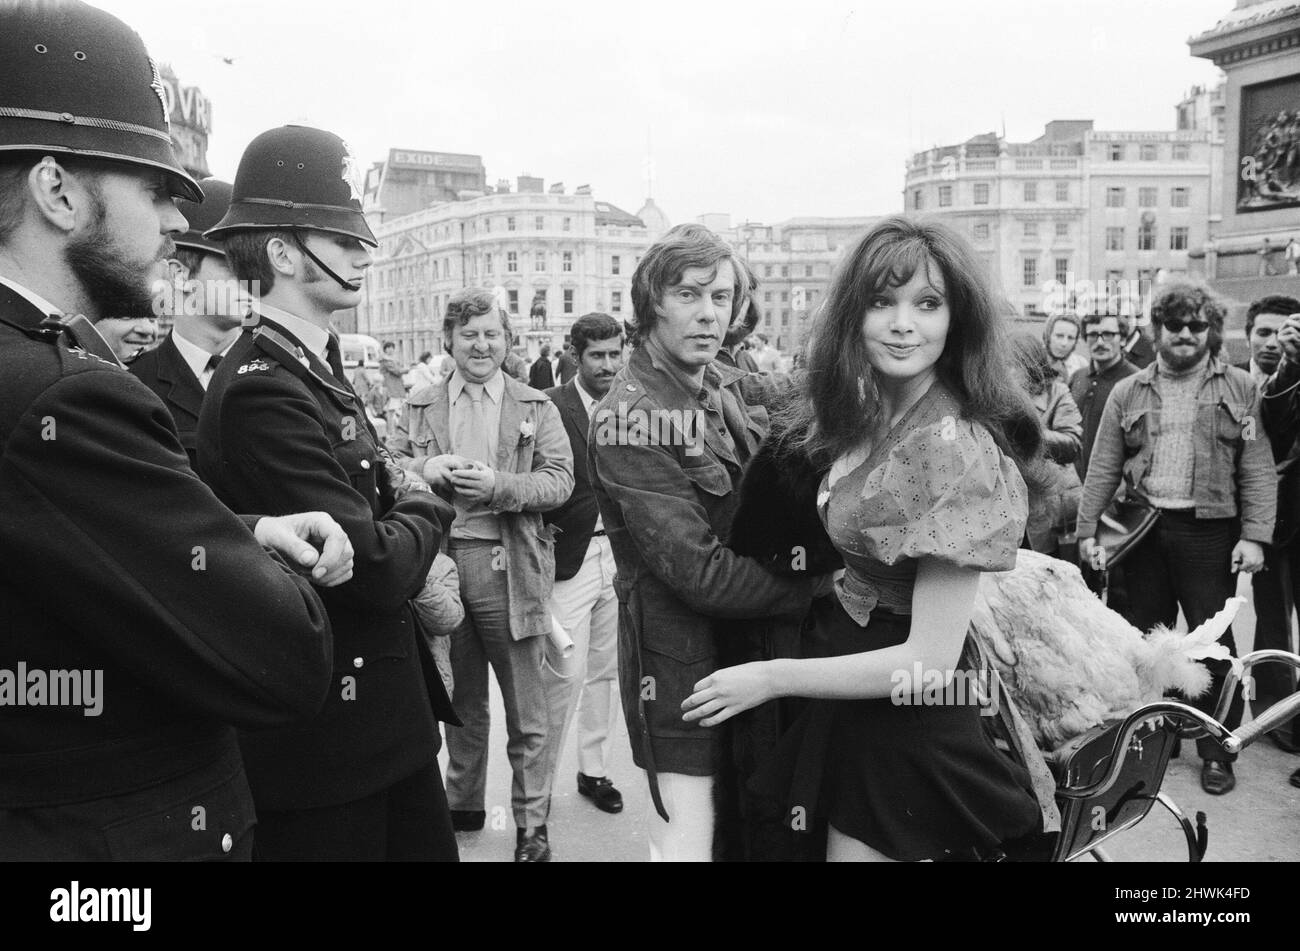 Actress and former model Madeline Smith was forcibly moved on by the law in company with a dodo in a pram in Trafalgar Square. She was advertising a sale of rare, stuffed natural history specimens for a friend who runs the British Natural History Company. Here she is pictured with Digby the Dodo in Trafalgar Square being escorted by three policemen. 24th September 1972.  *** Local Caption *** Maddy Smith Stock Photo